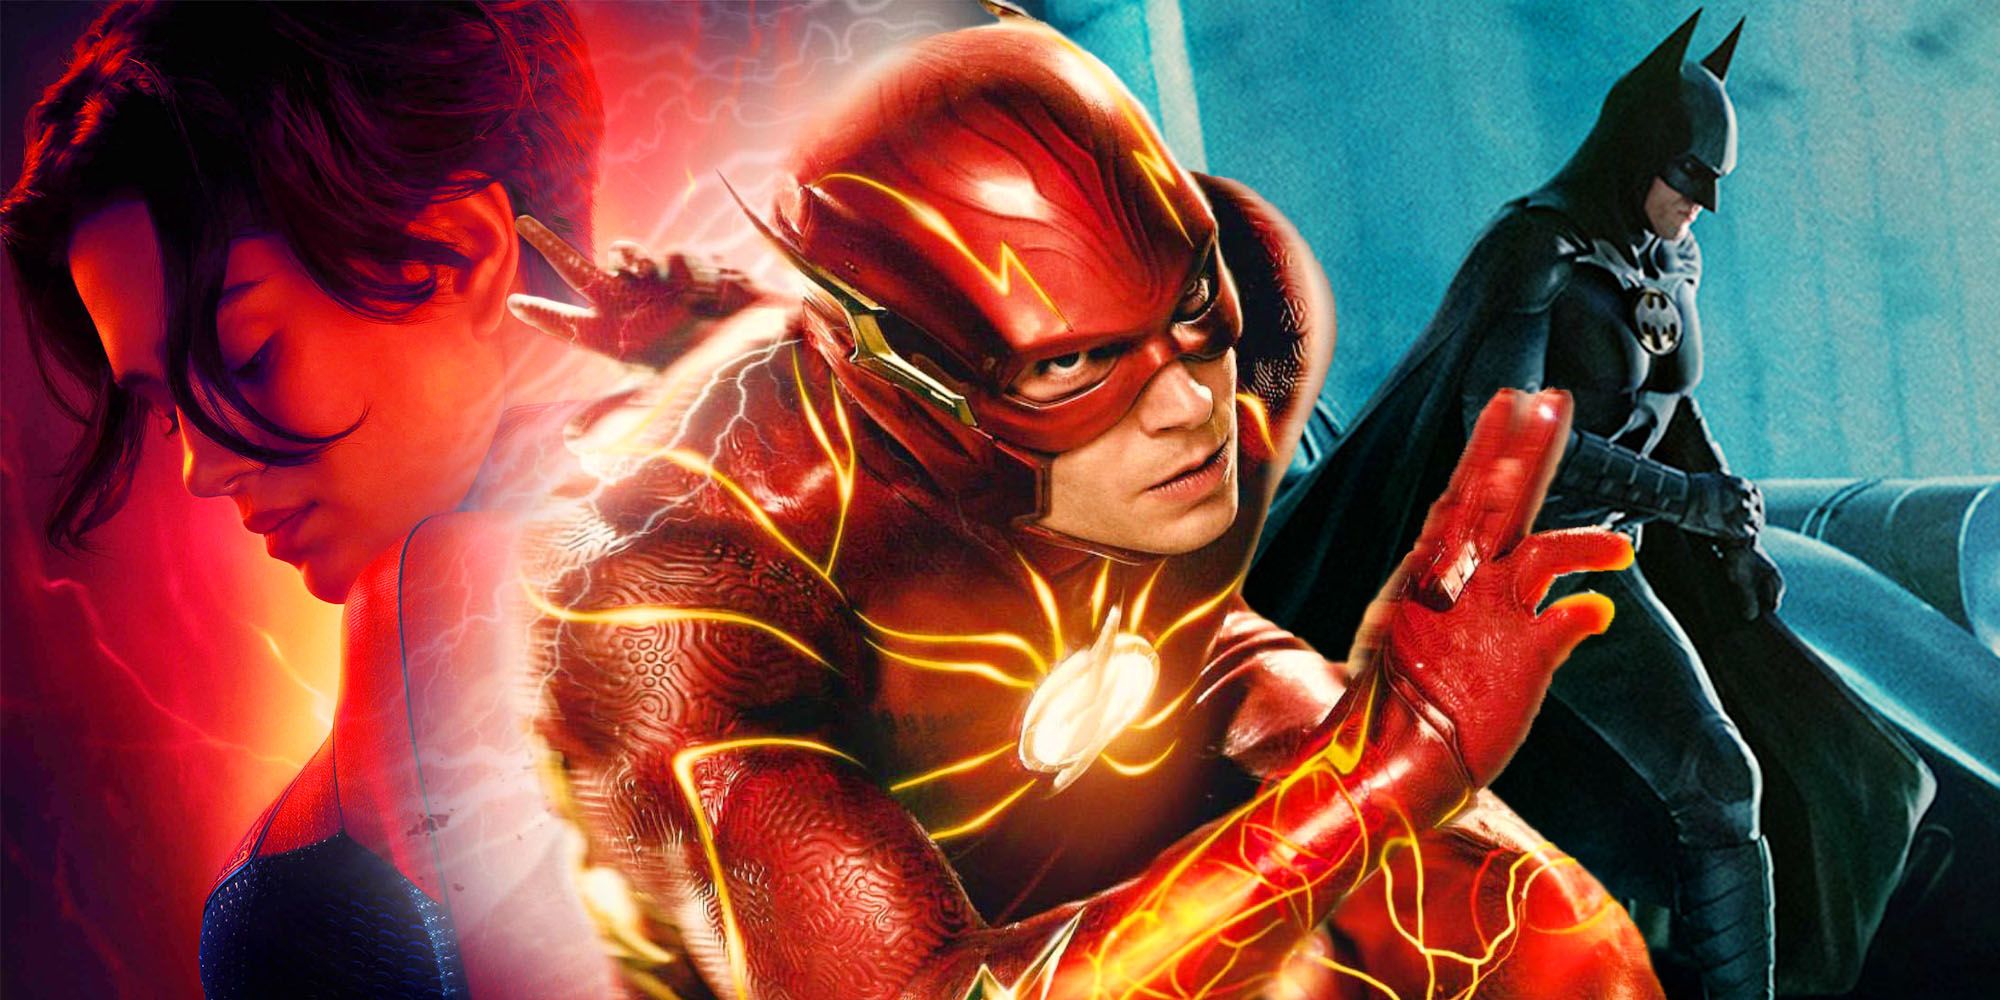 Zack Snyder Responds To Ezra Miller’s Performance In The Flash Movie, 9 Years After Casting Them